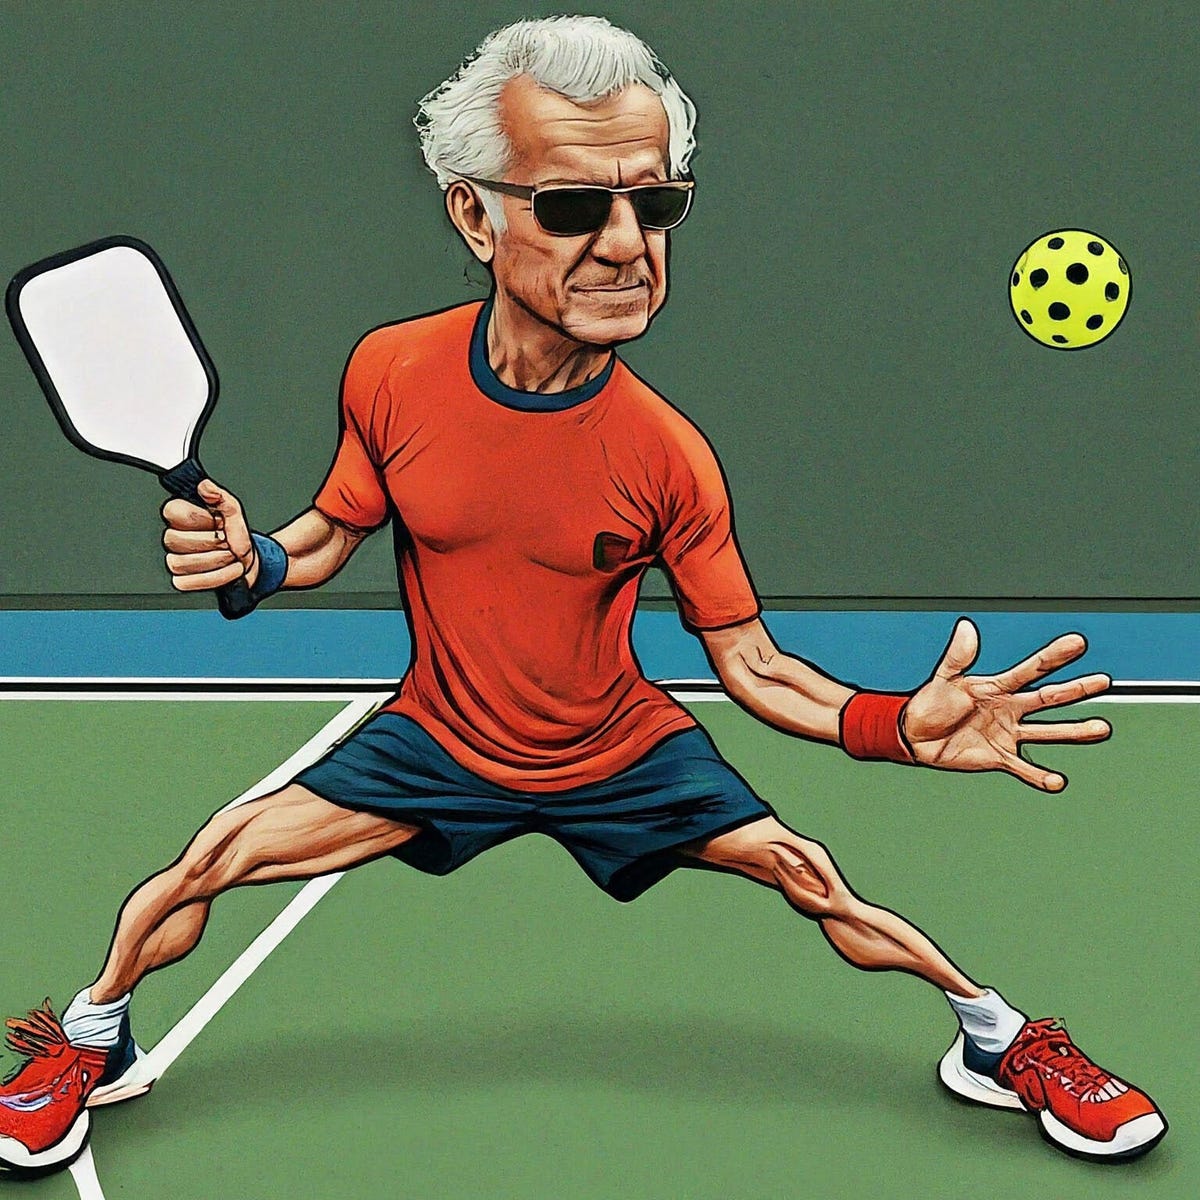 An AI-generated image of a man playing pickleball